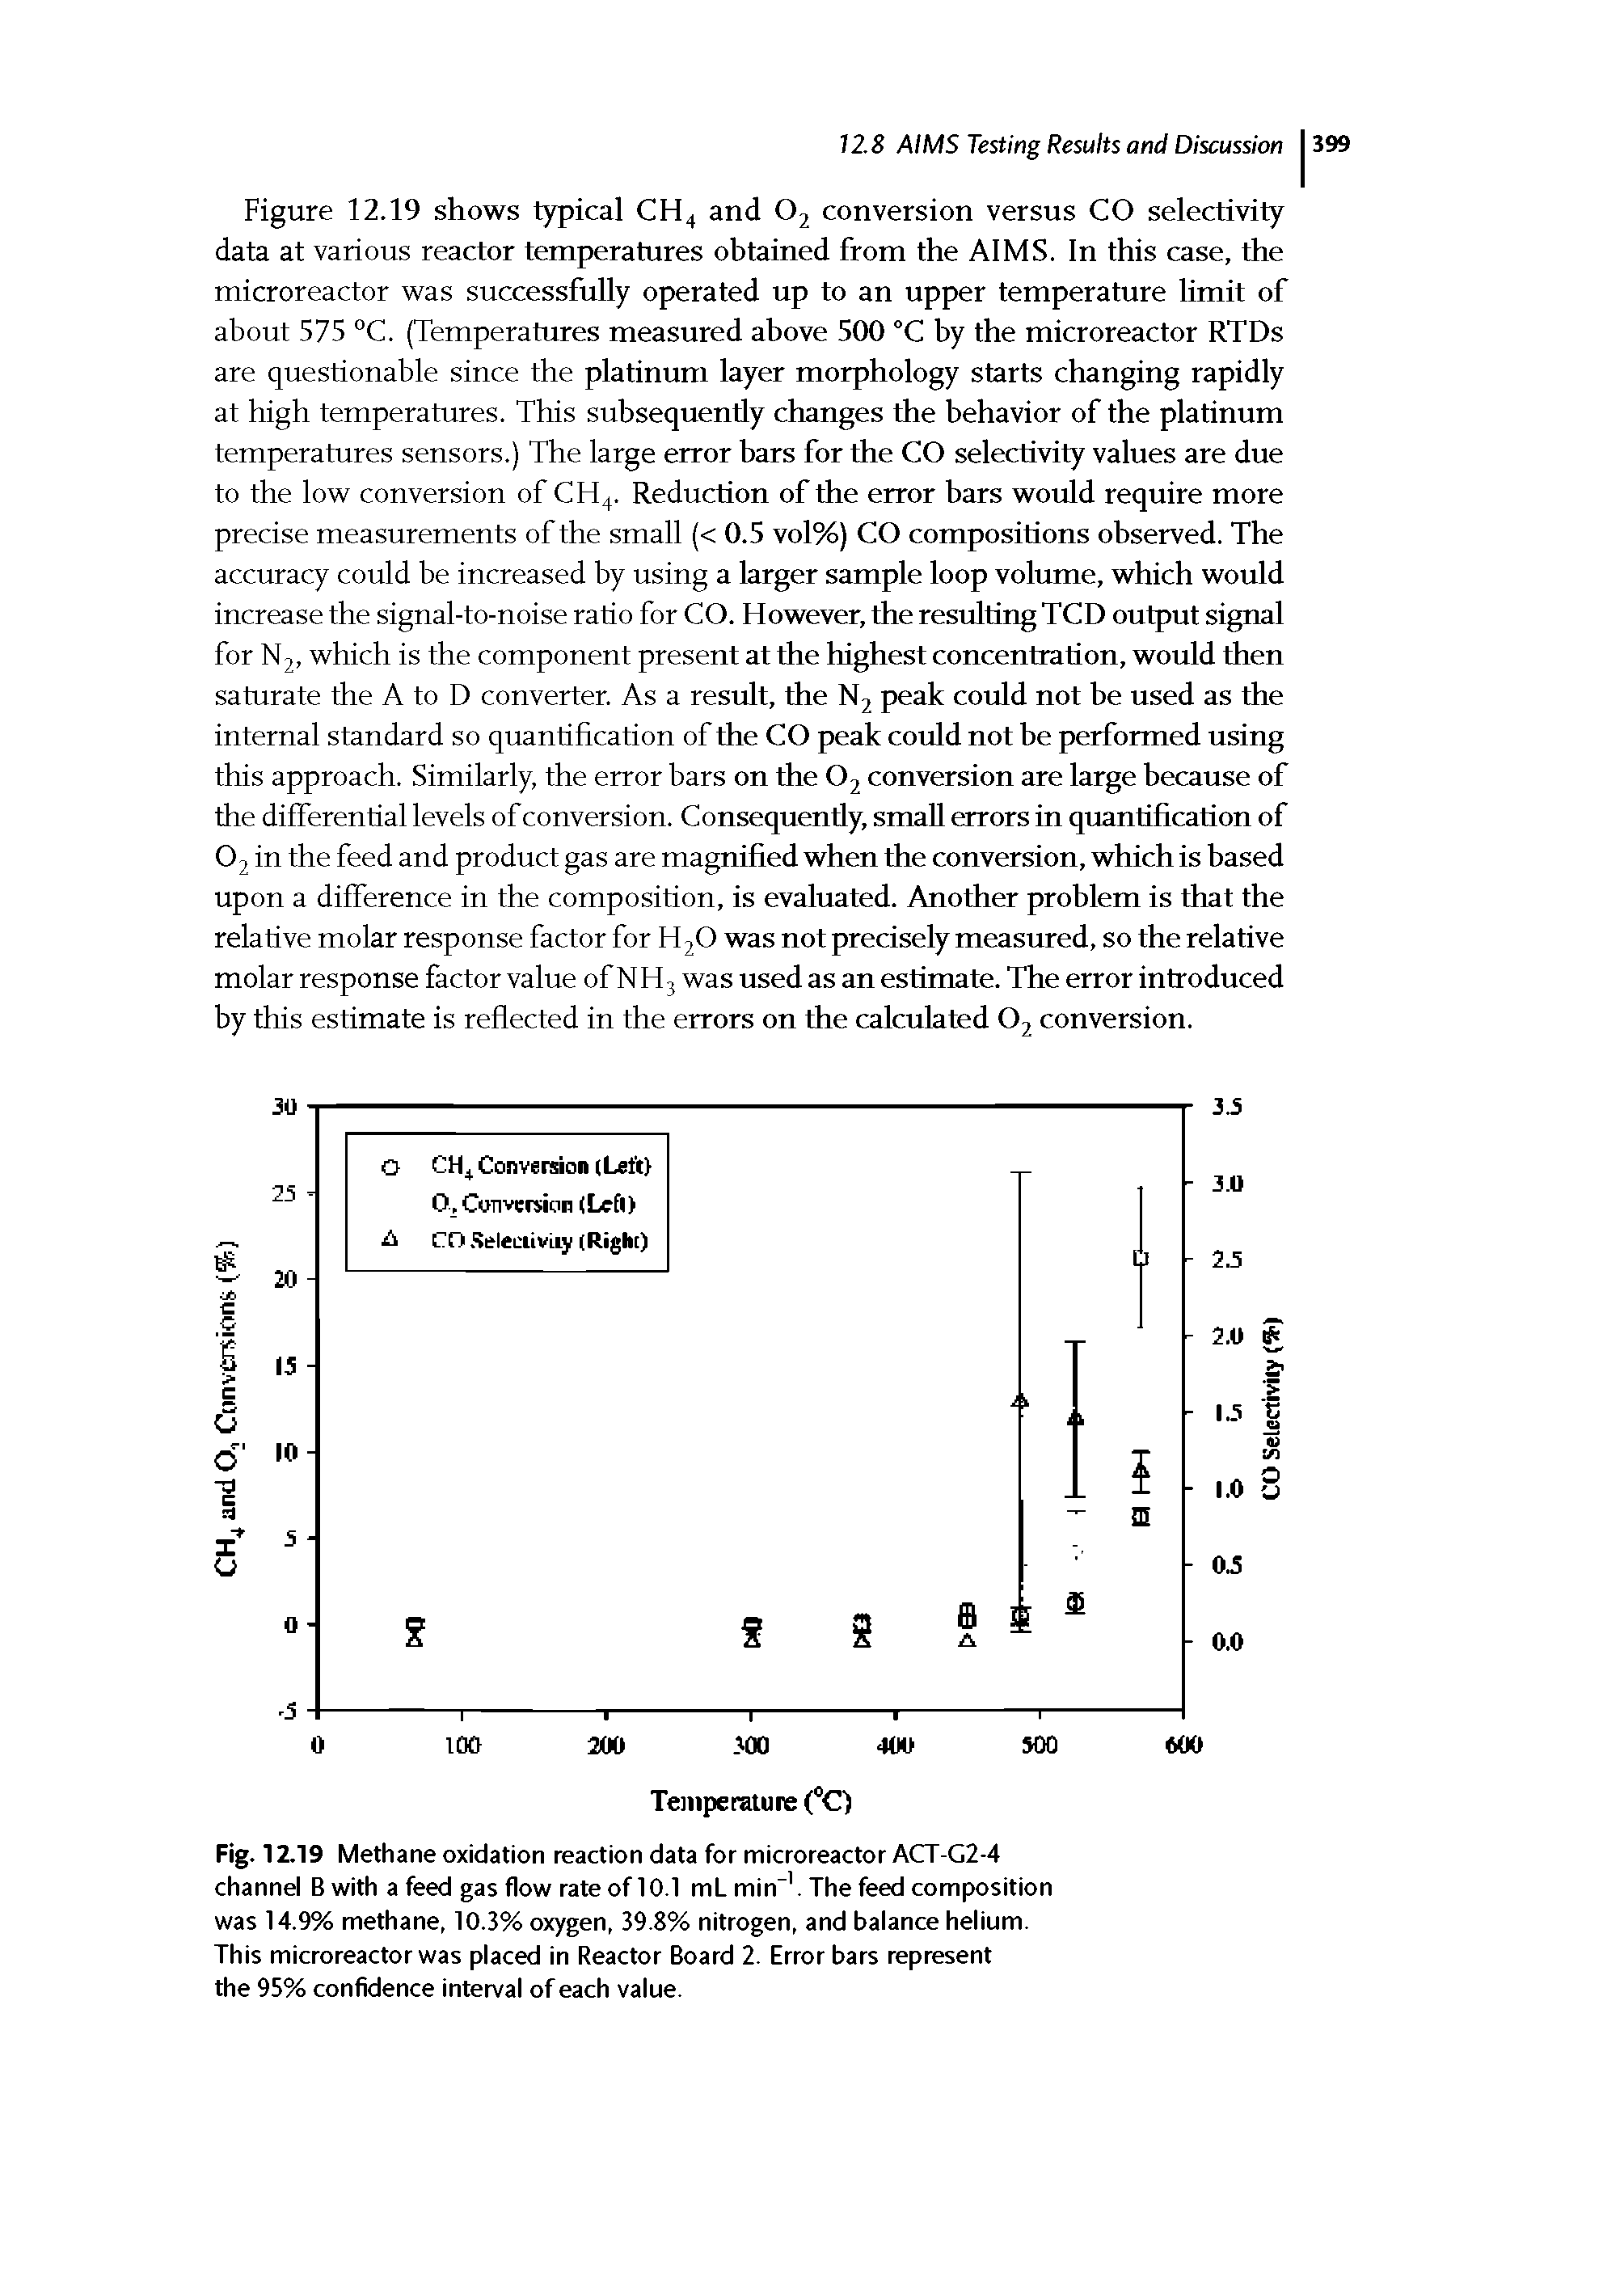 Fig. 12.19 Methane oxidation reaction data for microreactor ACT-G2-4 channel B with a feed gas flow rate of 10.1 ml min". The feed composition was 14.9% methane, 10.3% oxygen, 39.8% nitrogen, and balance helium. This microreactor was placed in Reactor Board 2. Error bars represent the 95% confidence interval of each value.